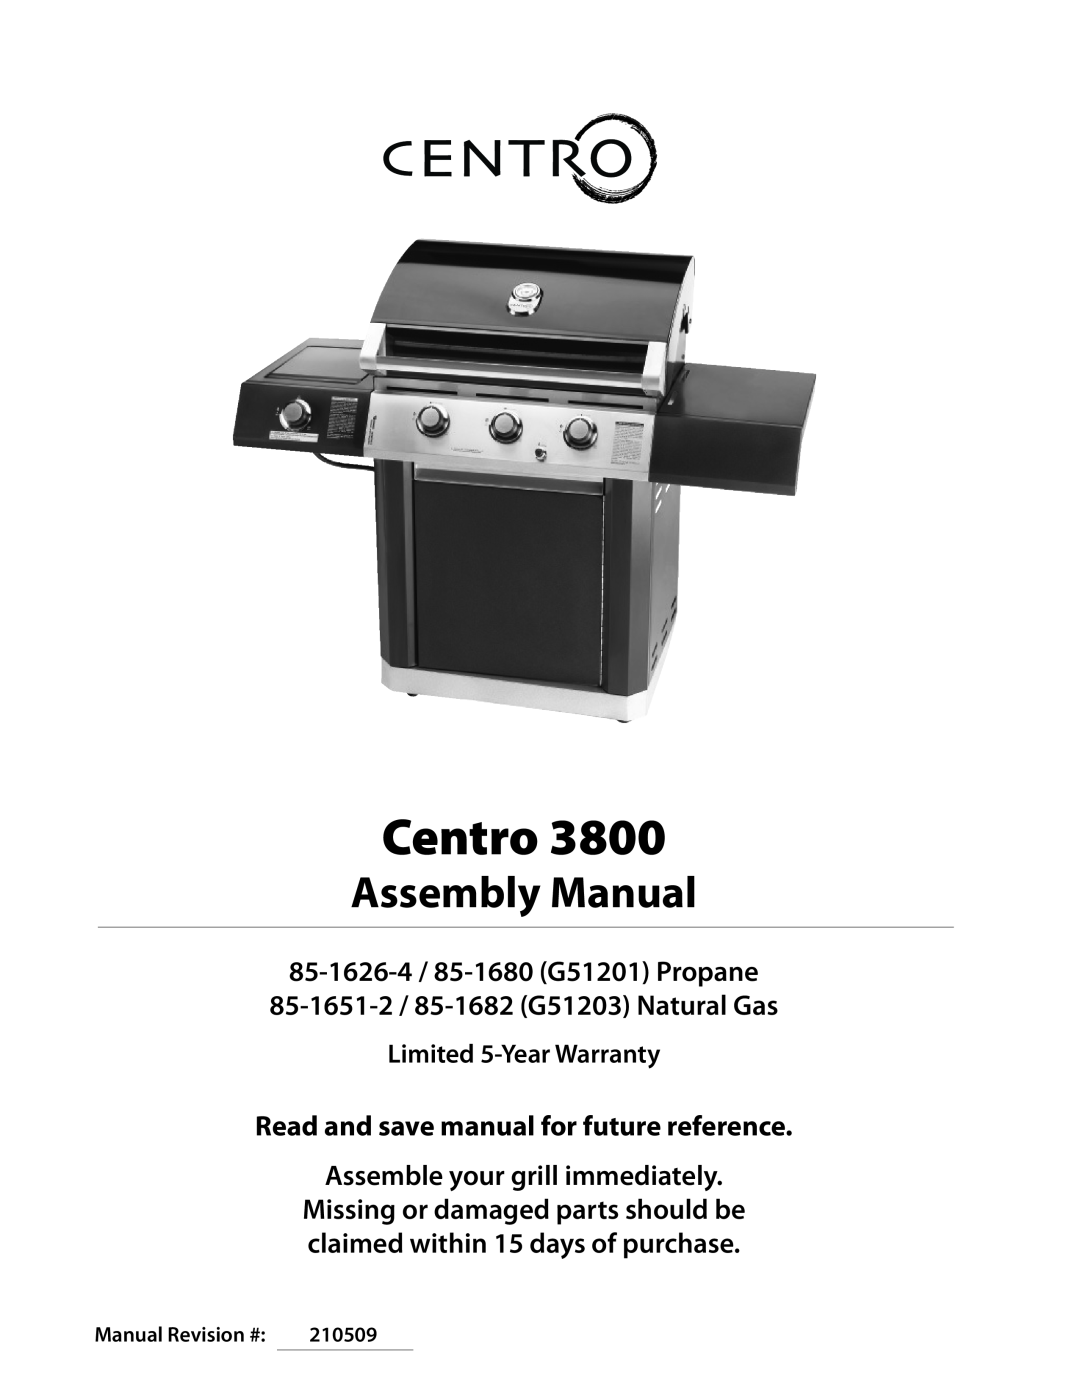 Centro 3800 warranty Missing or damaged parts should be claimed within 15 days of purchase, 210509, Centro 